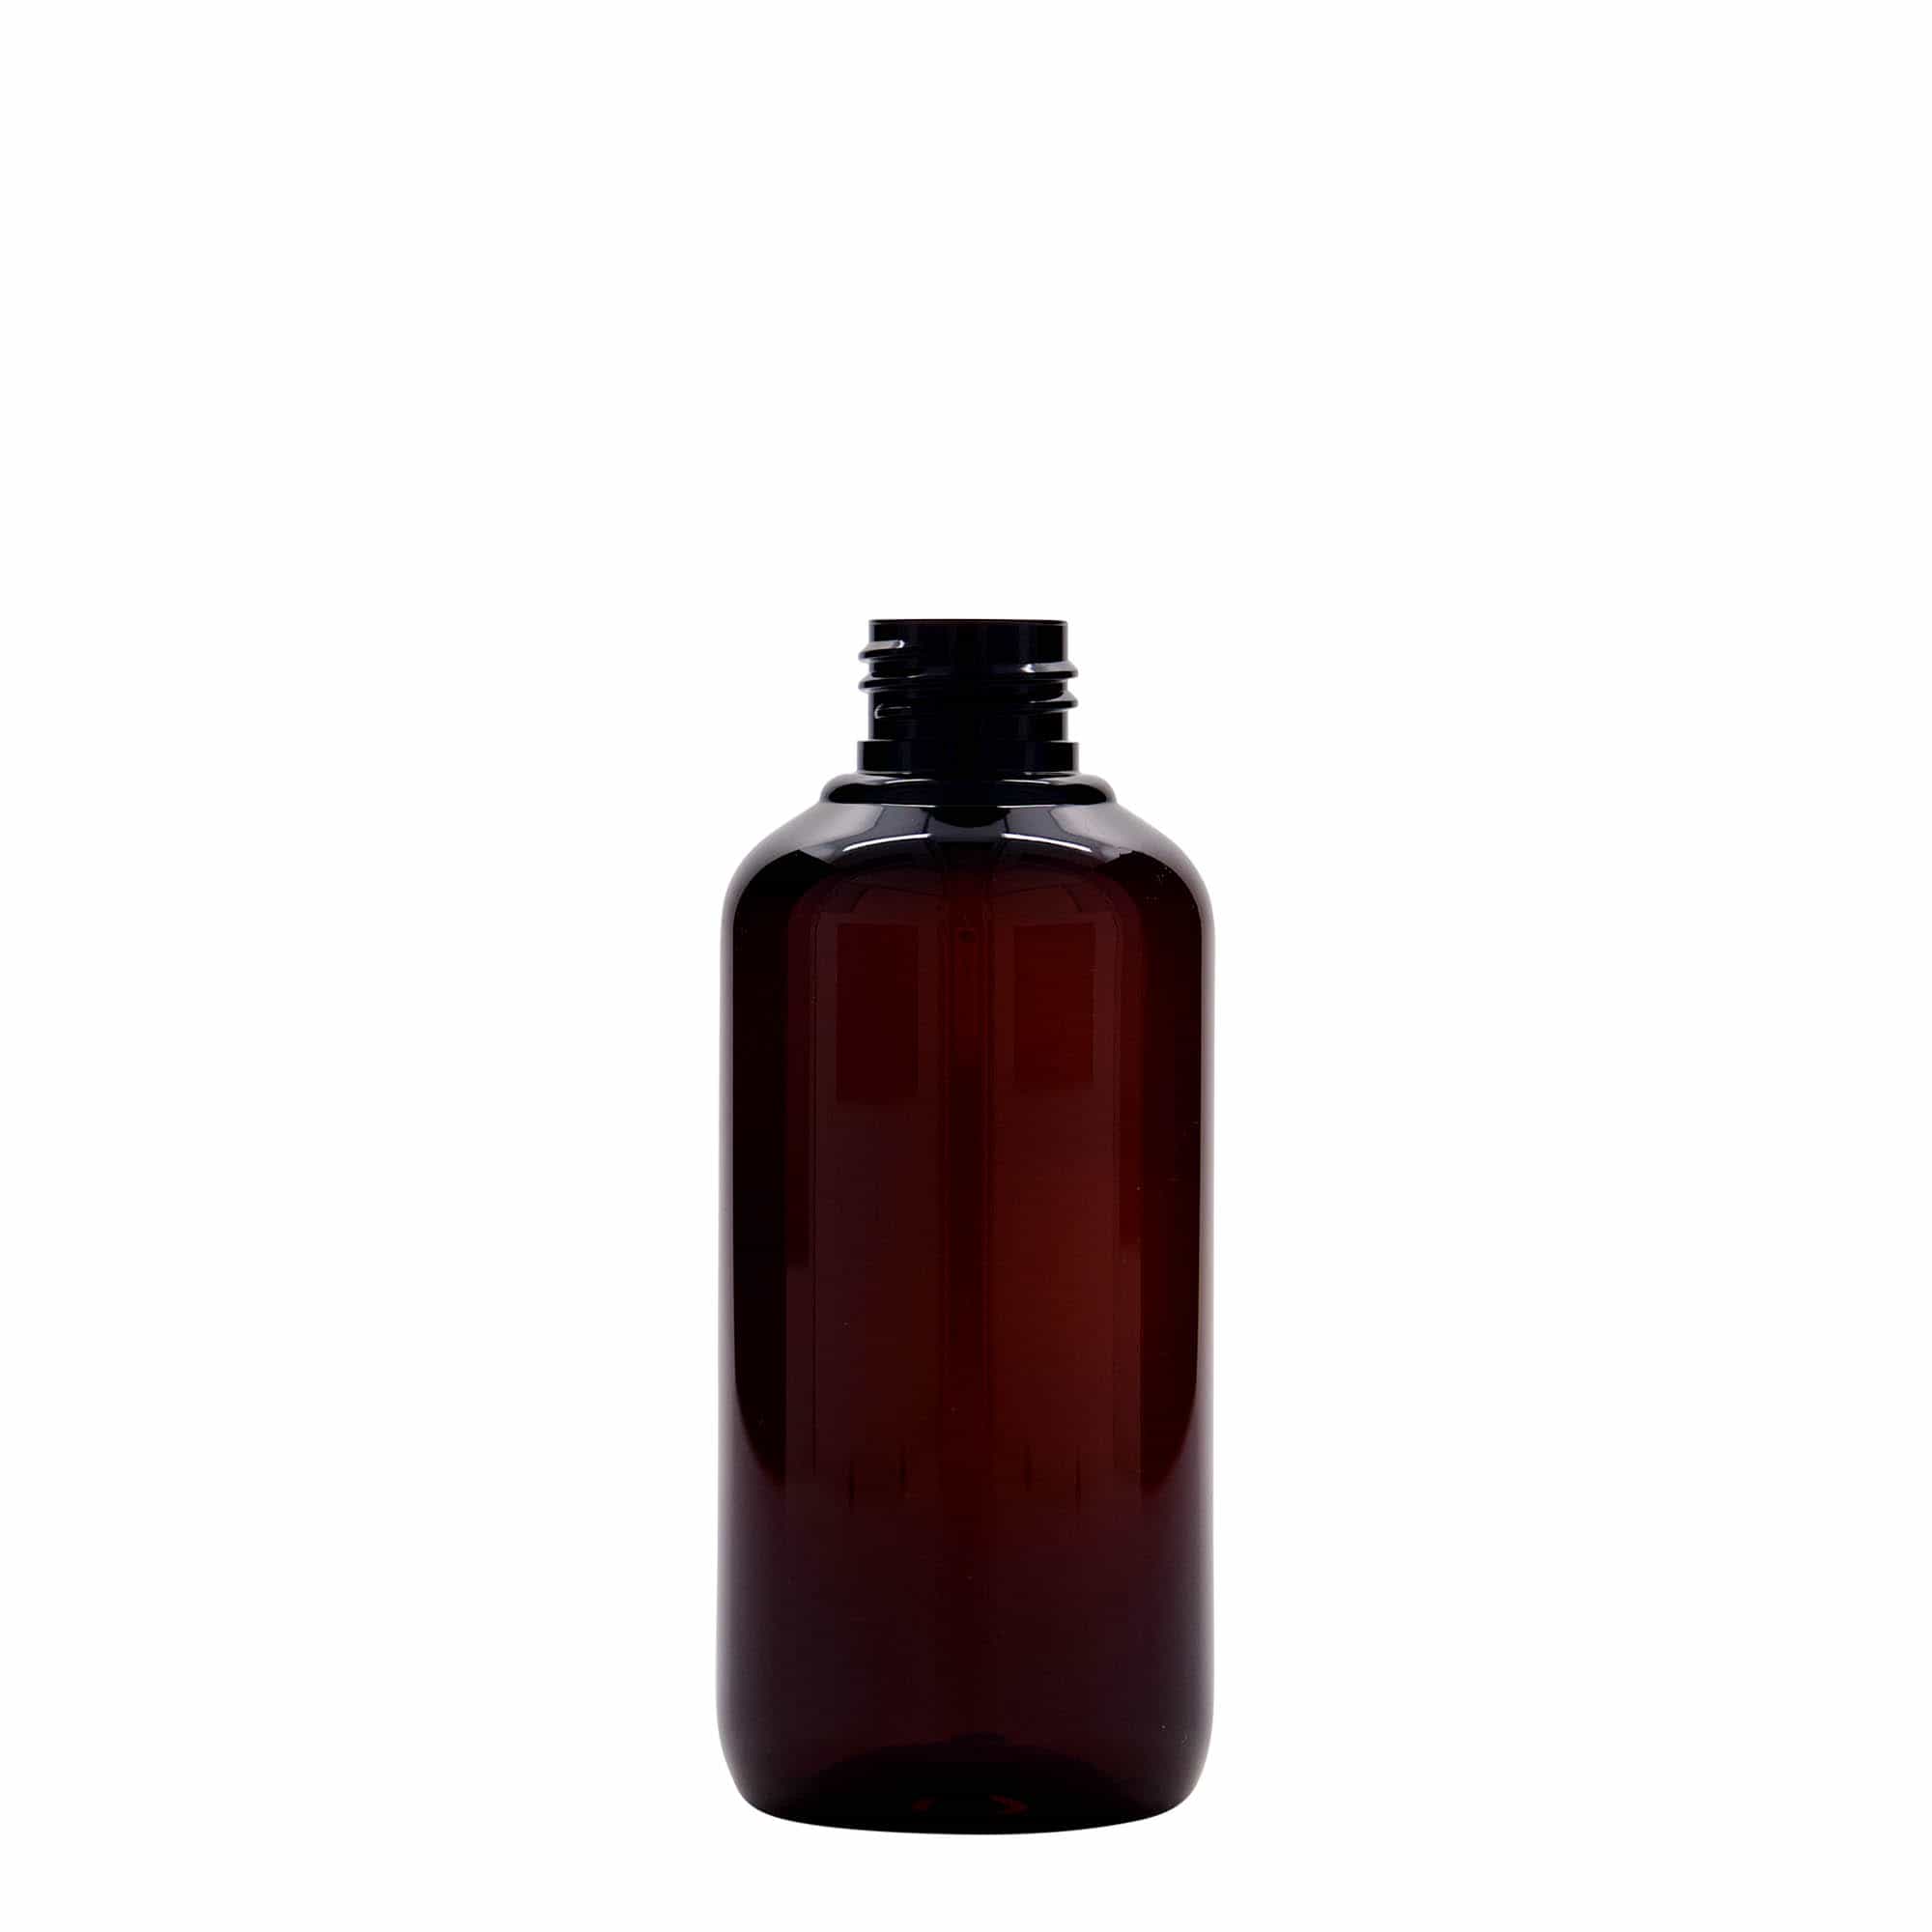 200 ml recycled plastic bottle 'Victor's Best', PCR, brown, closure: GPI 24/410